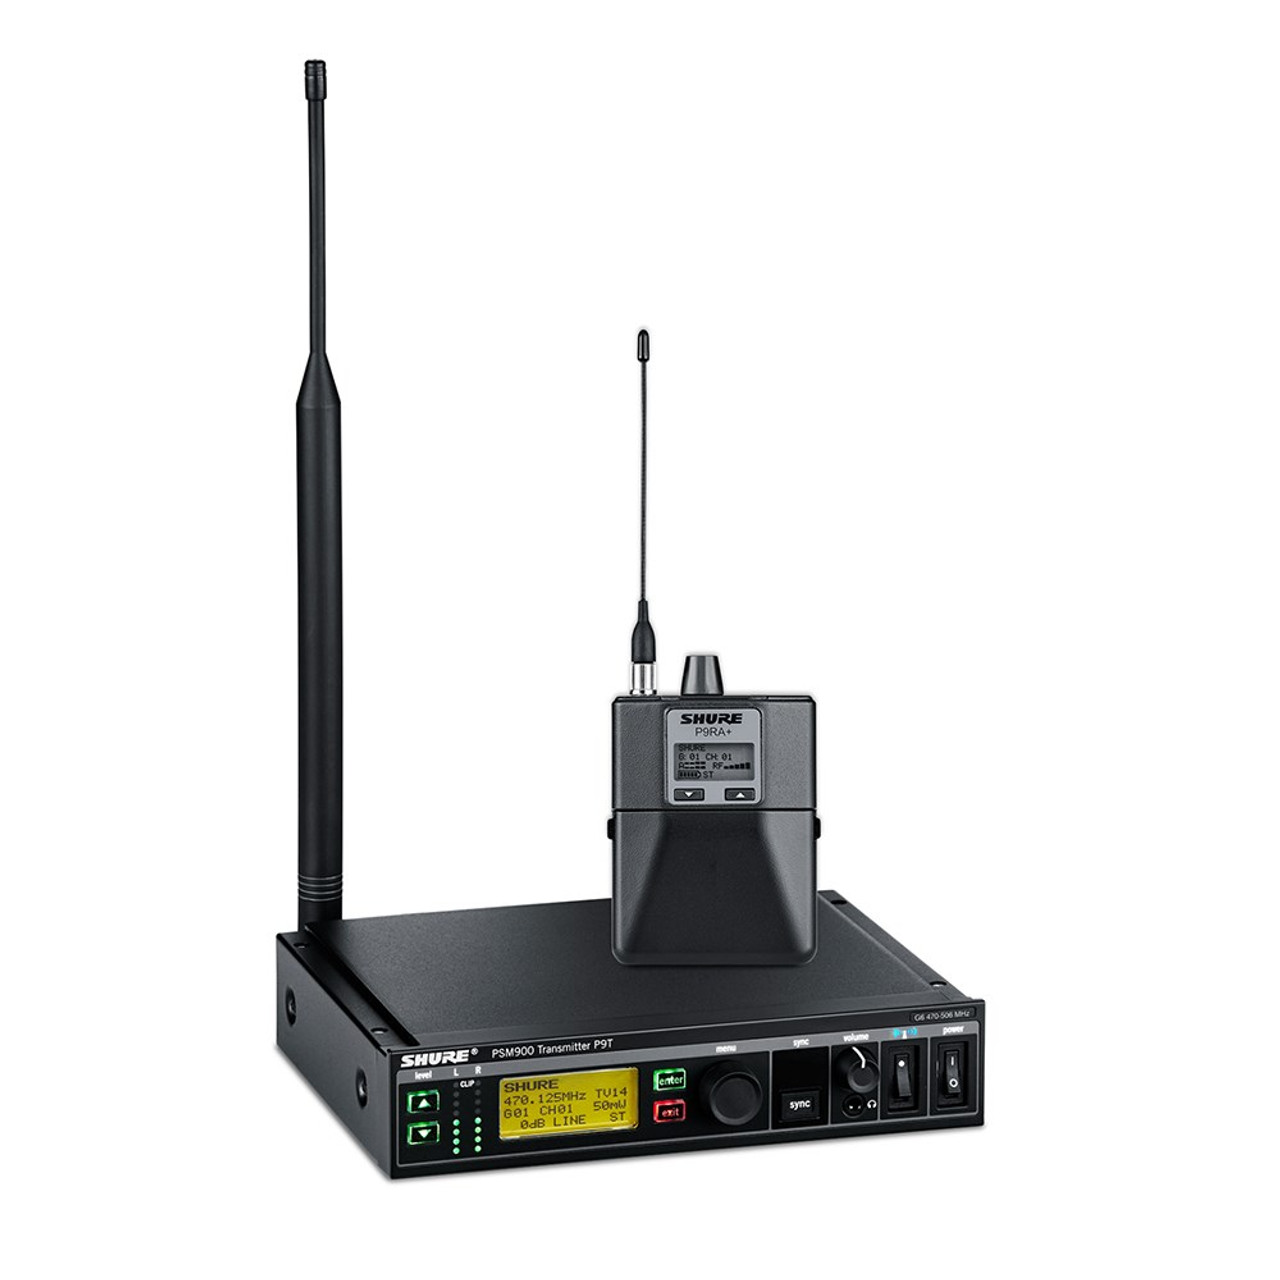 Shure SHR-P9TR+L6E PSM900 Wireless System 656-692 MHz 656-692 MHz